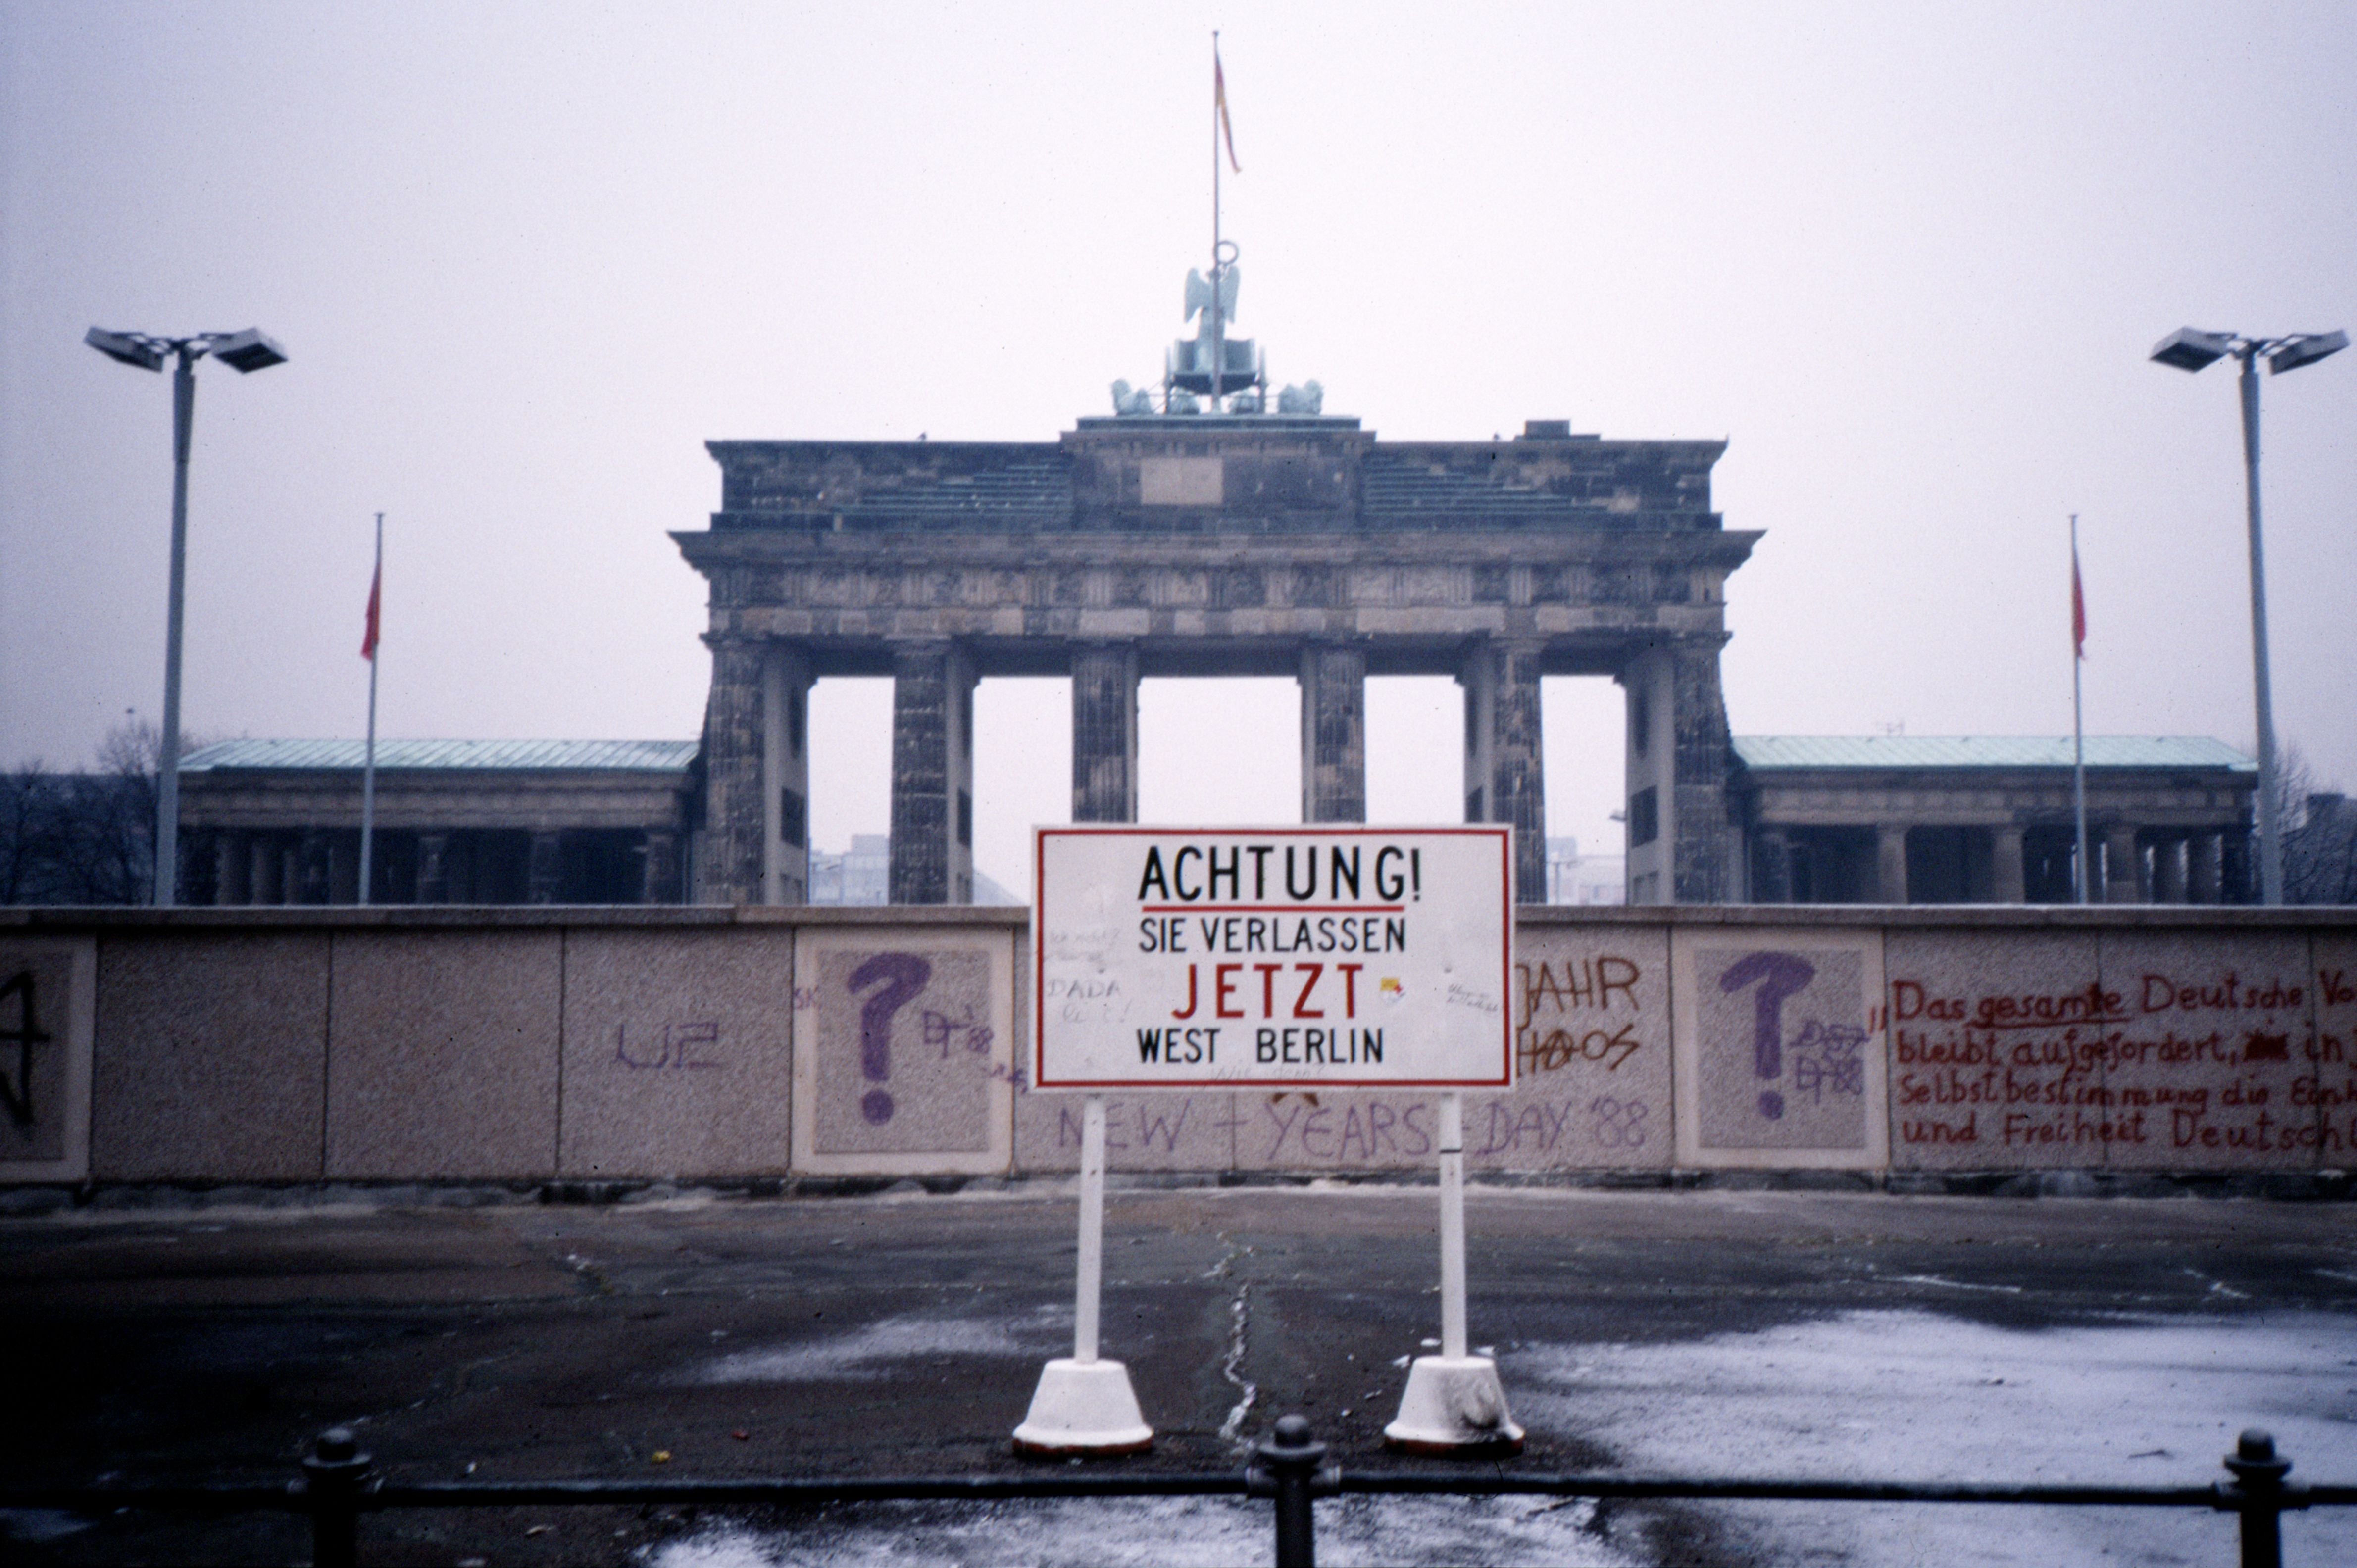 East Berlin, the Wall and the Brandenburg Gate in 1988